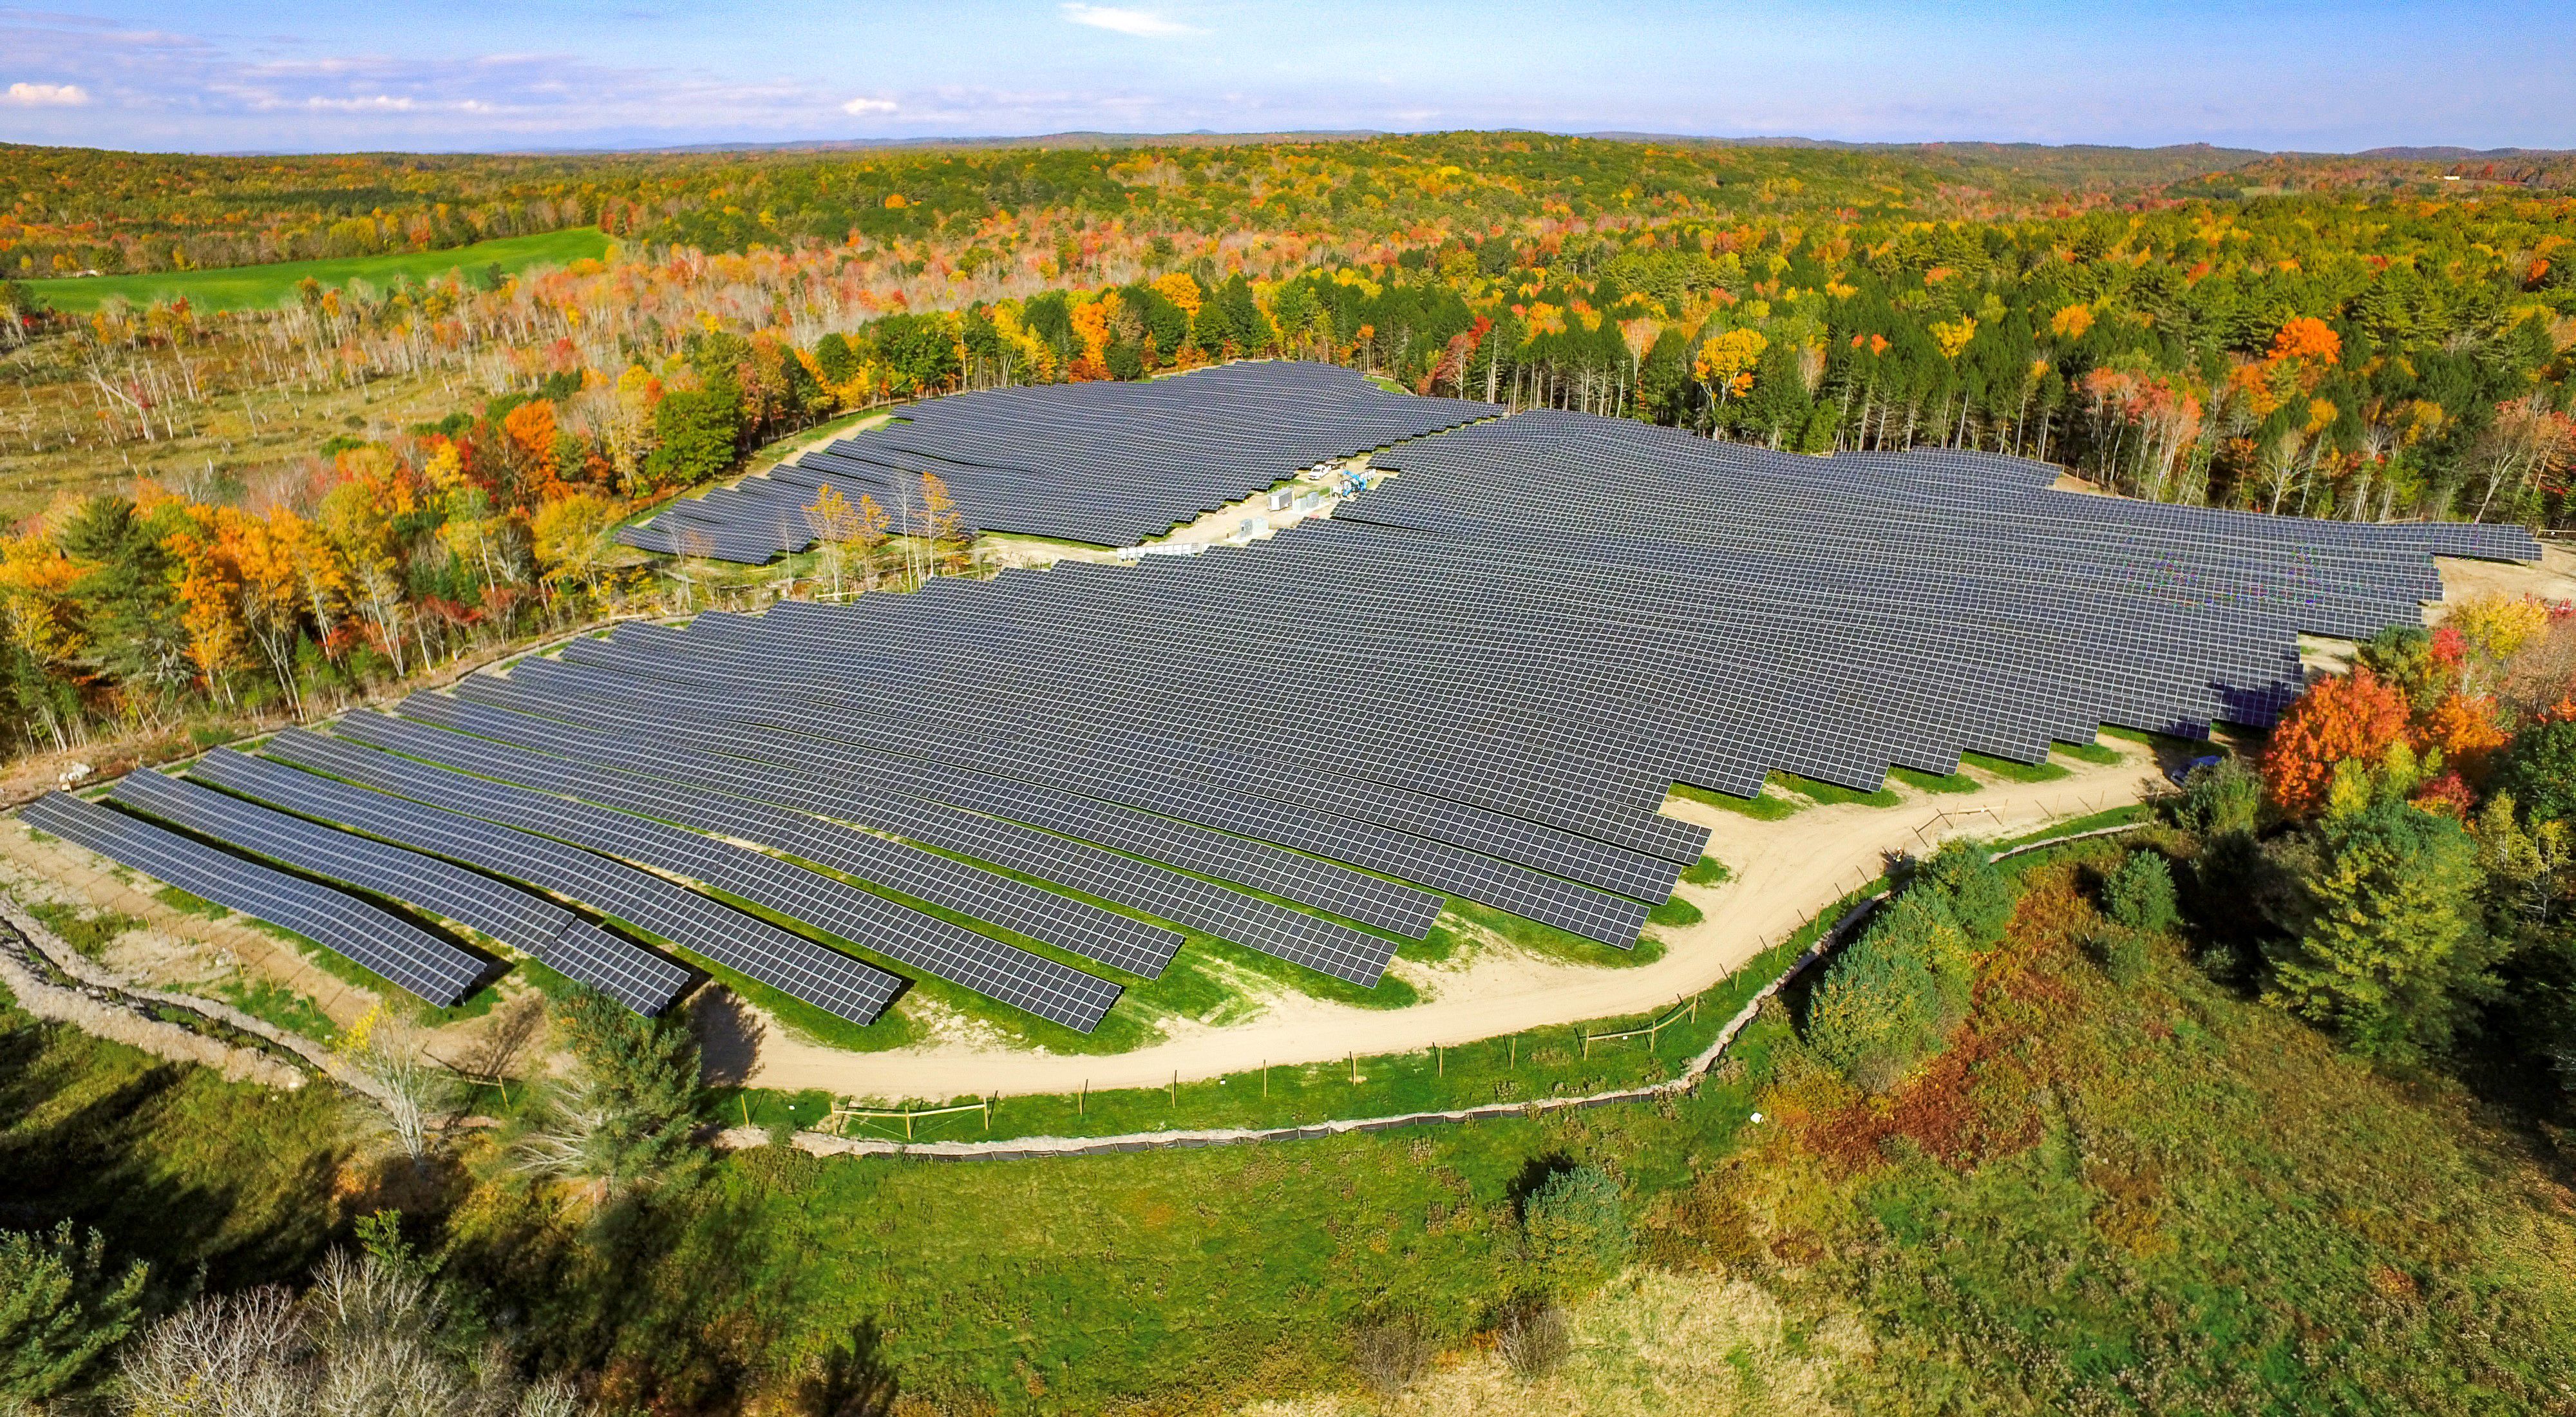 View of a solar array surrounded by forest trees.